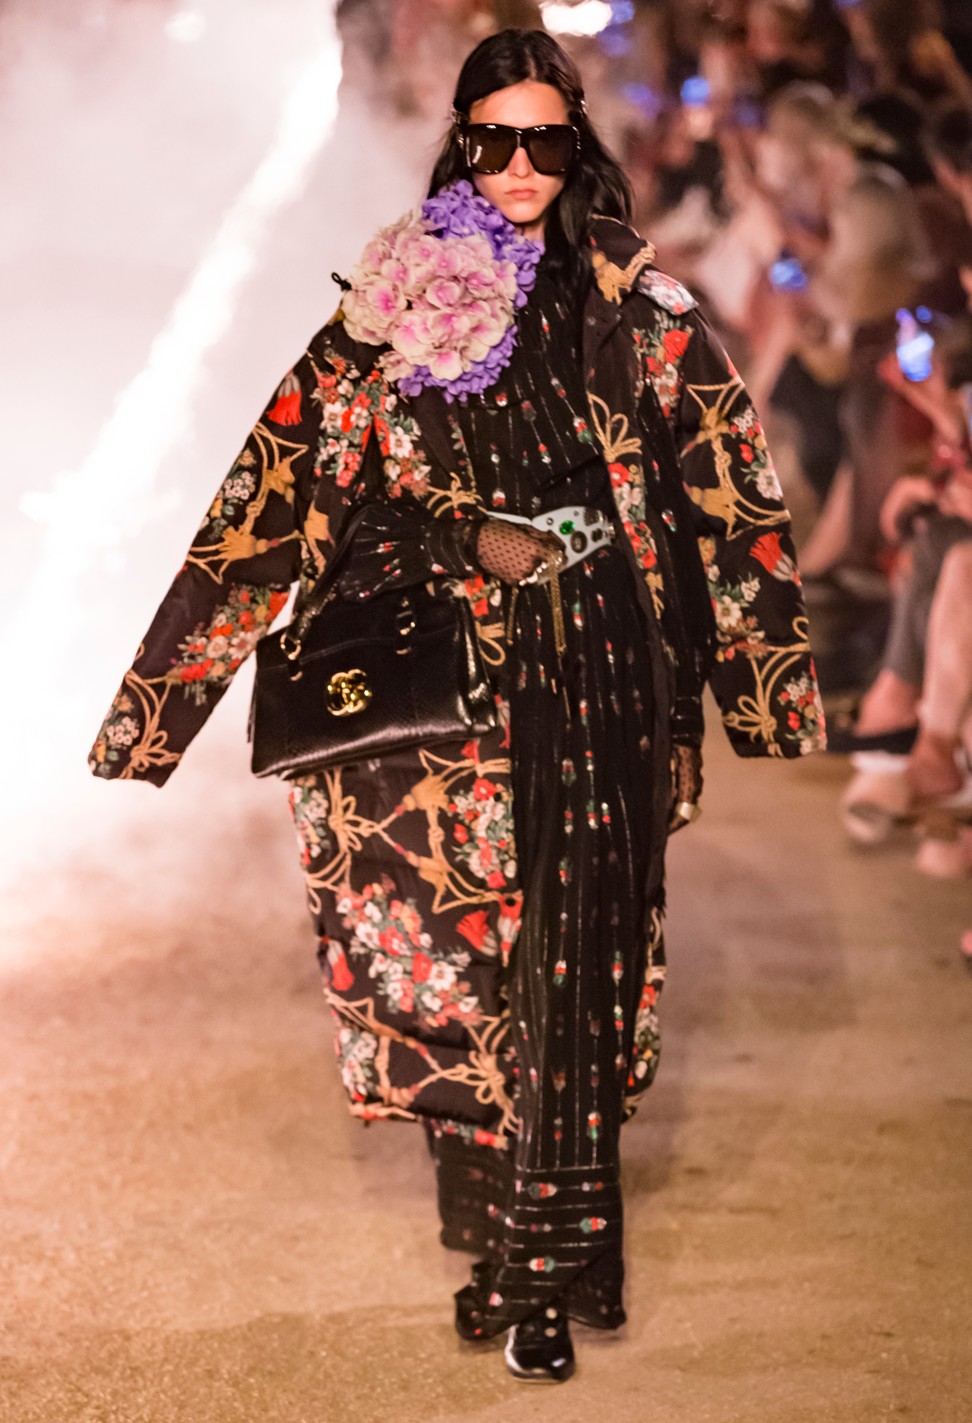 A look from Gucci’s cruise 2019 collection. Boho days are back. Gucci has been going down this route for seasons by falling for everything floral.